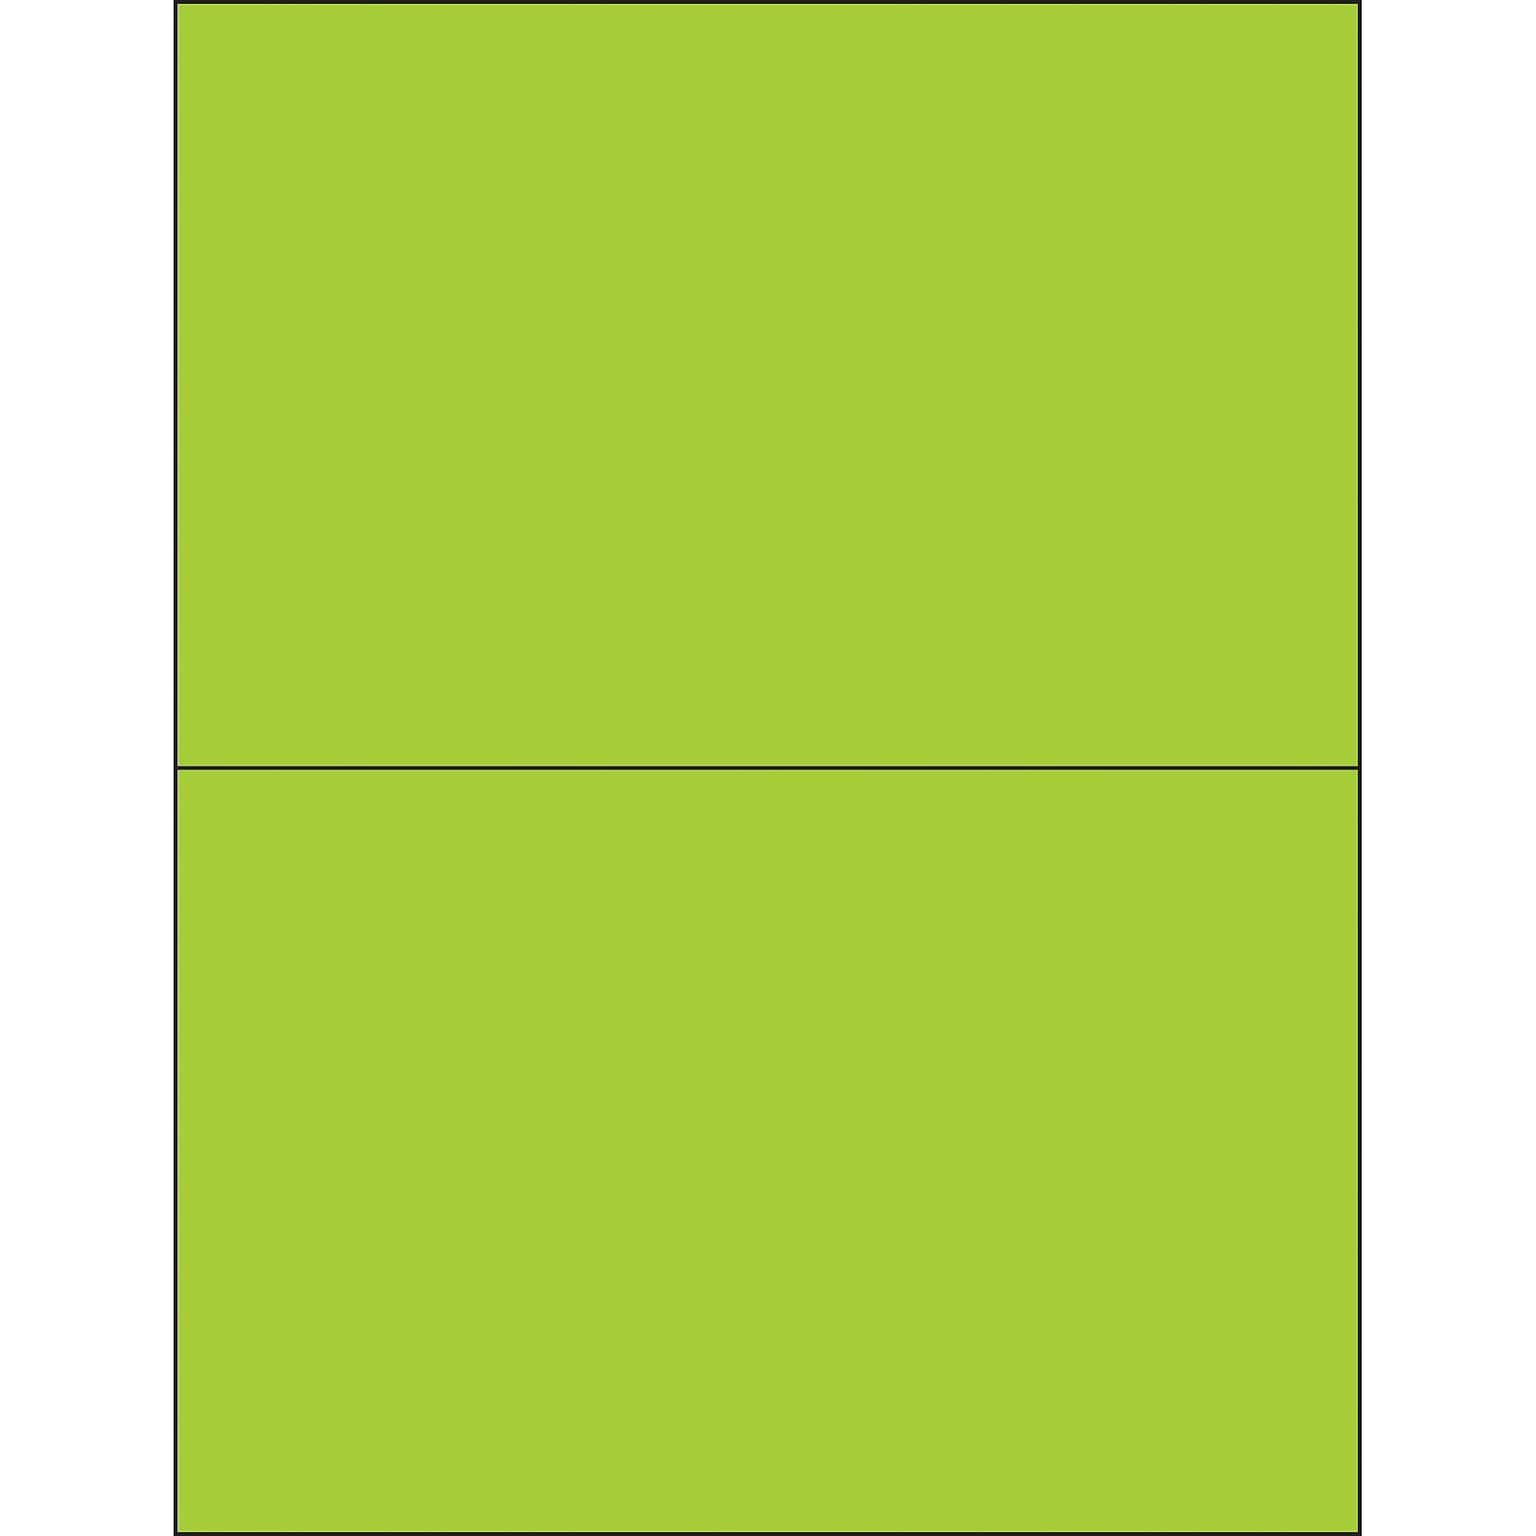 Tape Logic® Removable Rectangle Laser Labels, 8 1/2 x 5 1/2, Fluorescent Green, 200/Case (LL415GN)